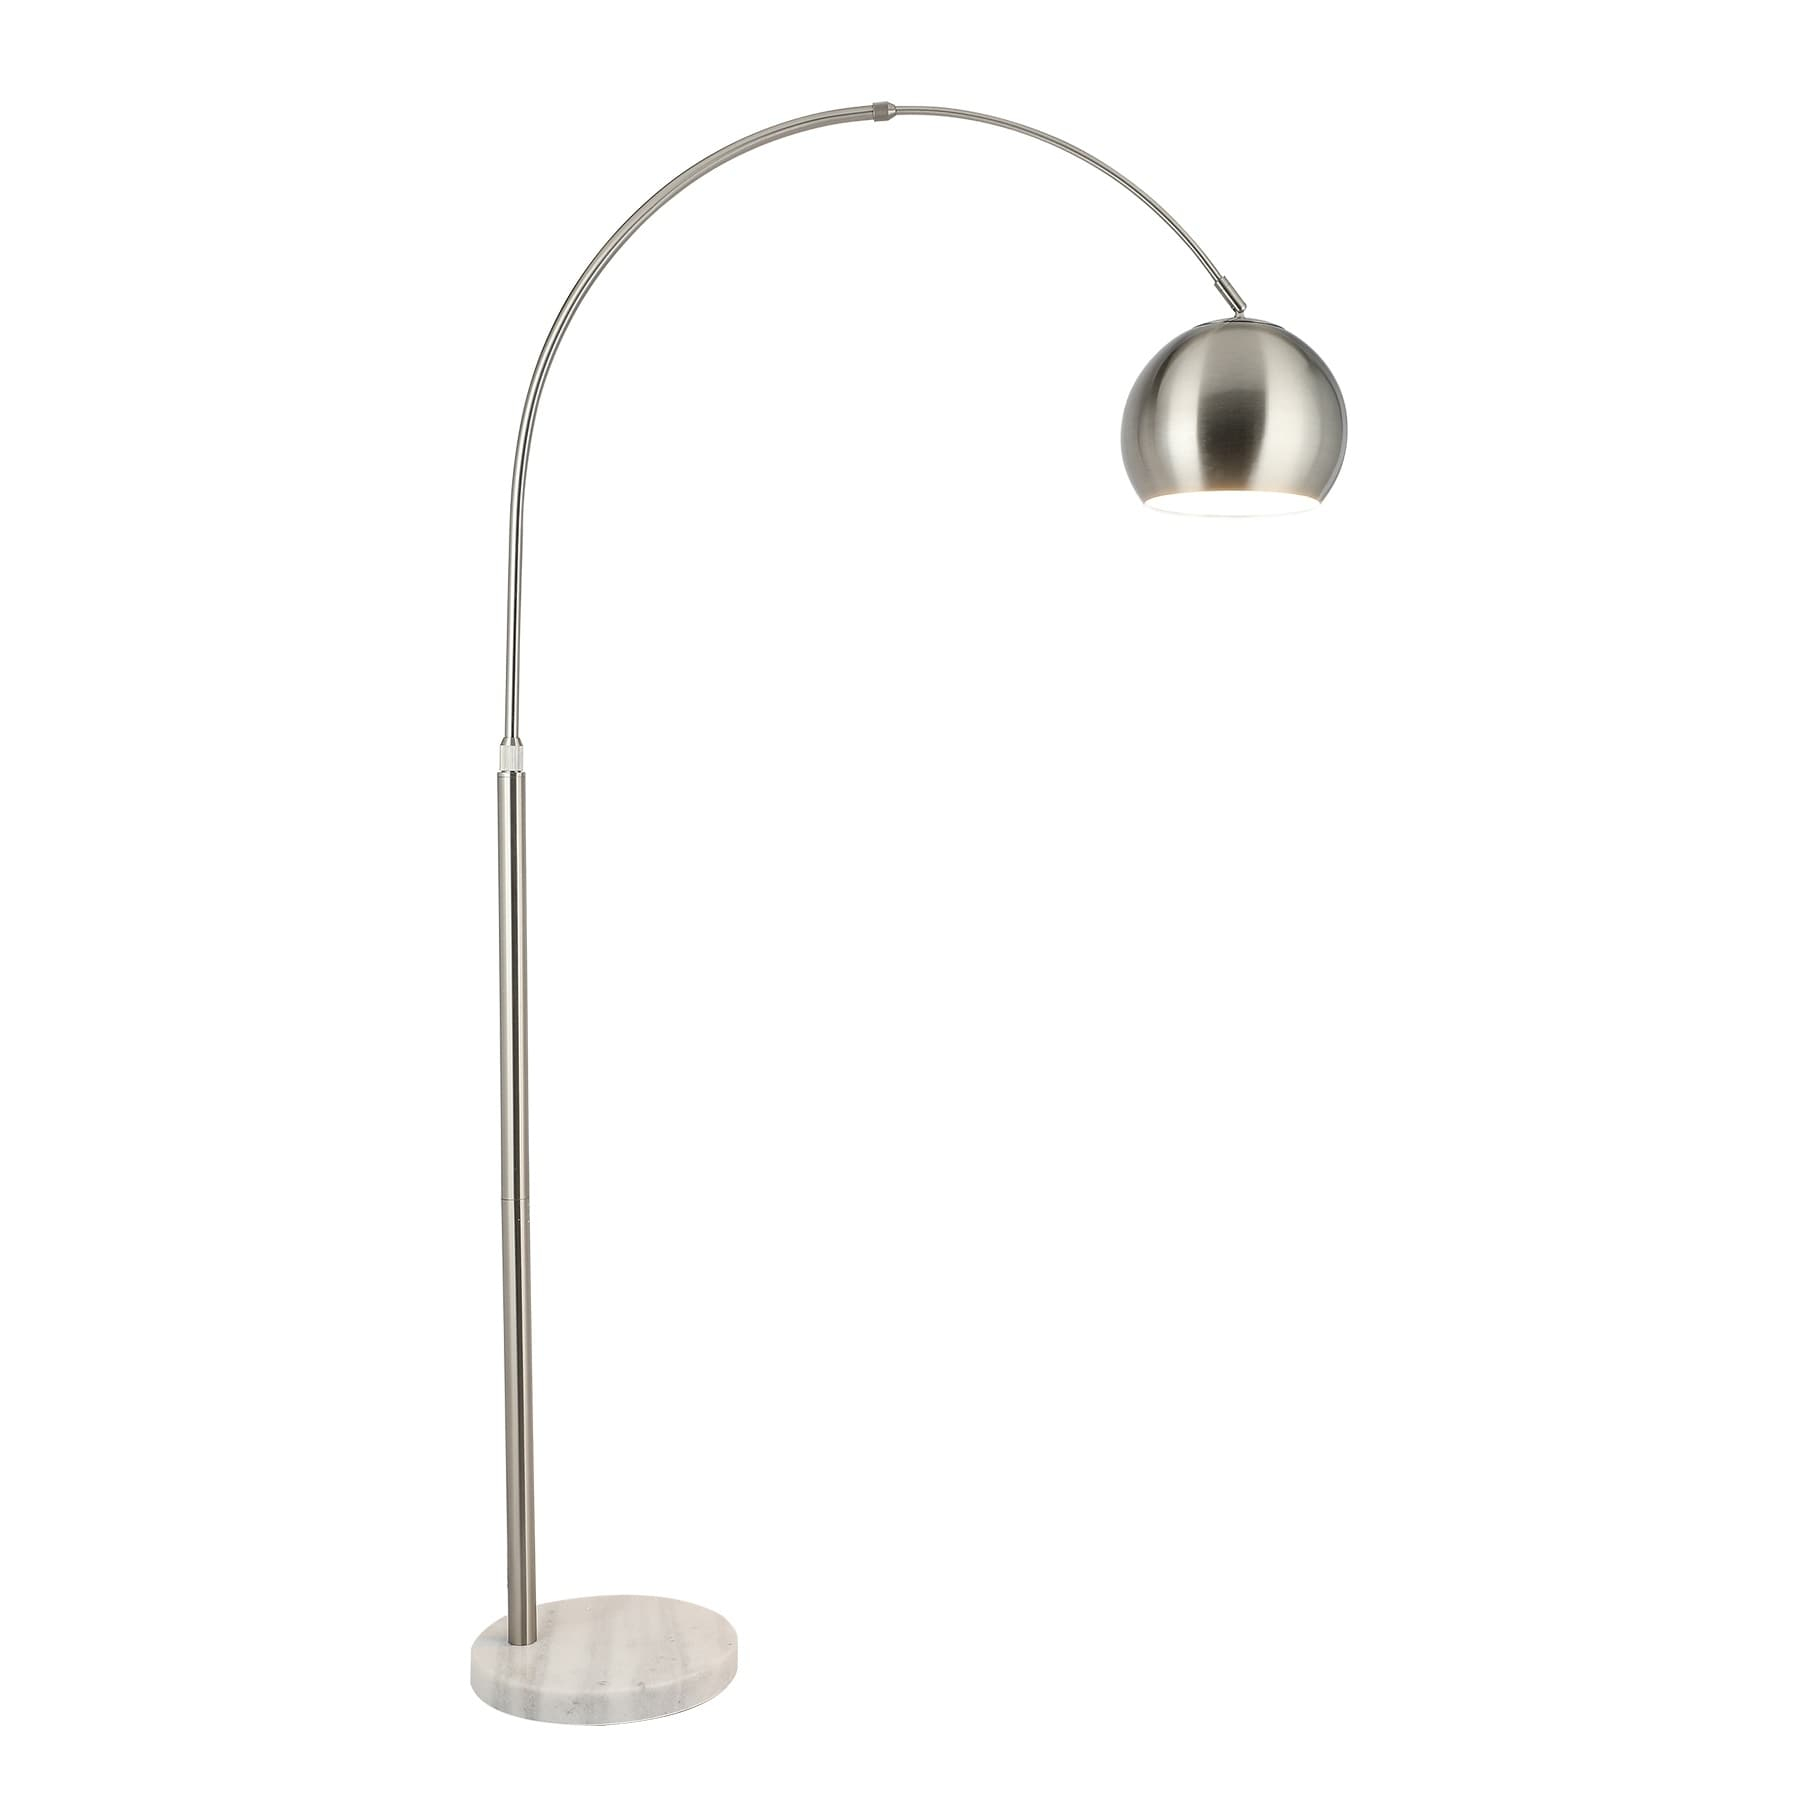 Co Z Modern Arc 70 Inch Nickel Finish Floor Lamp With Marble for dimensions 1800 X 1800